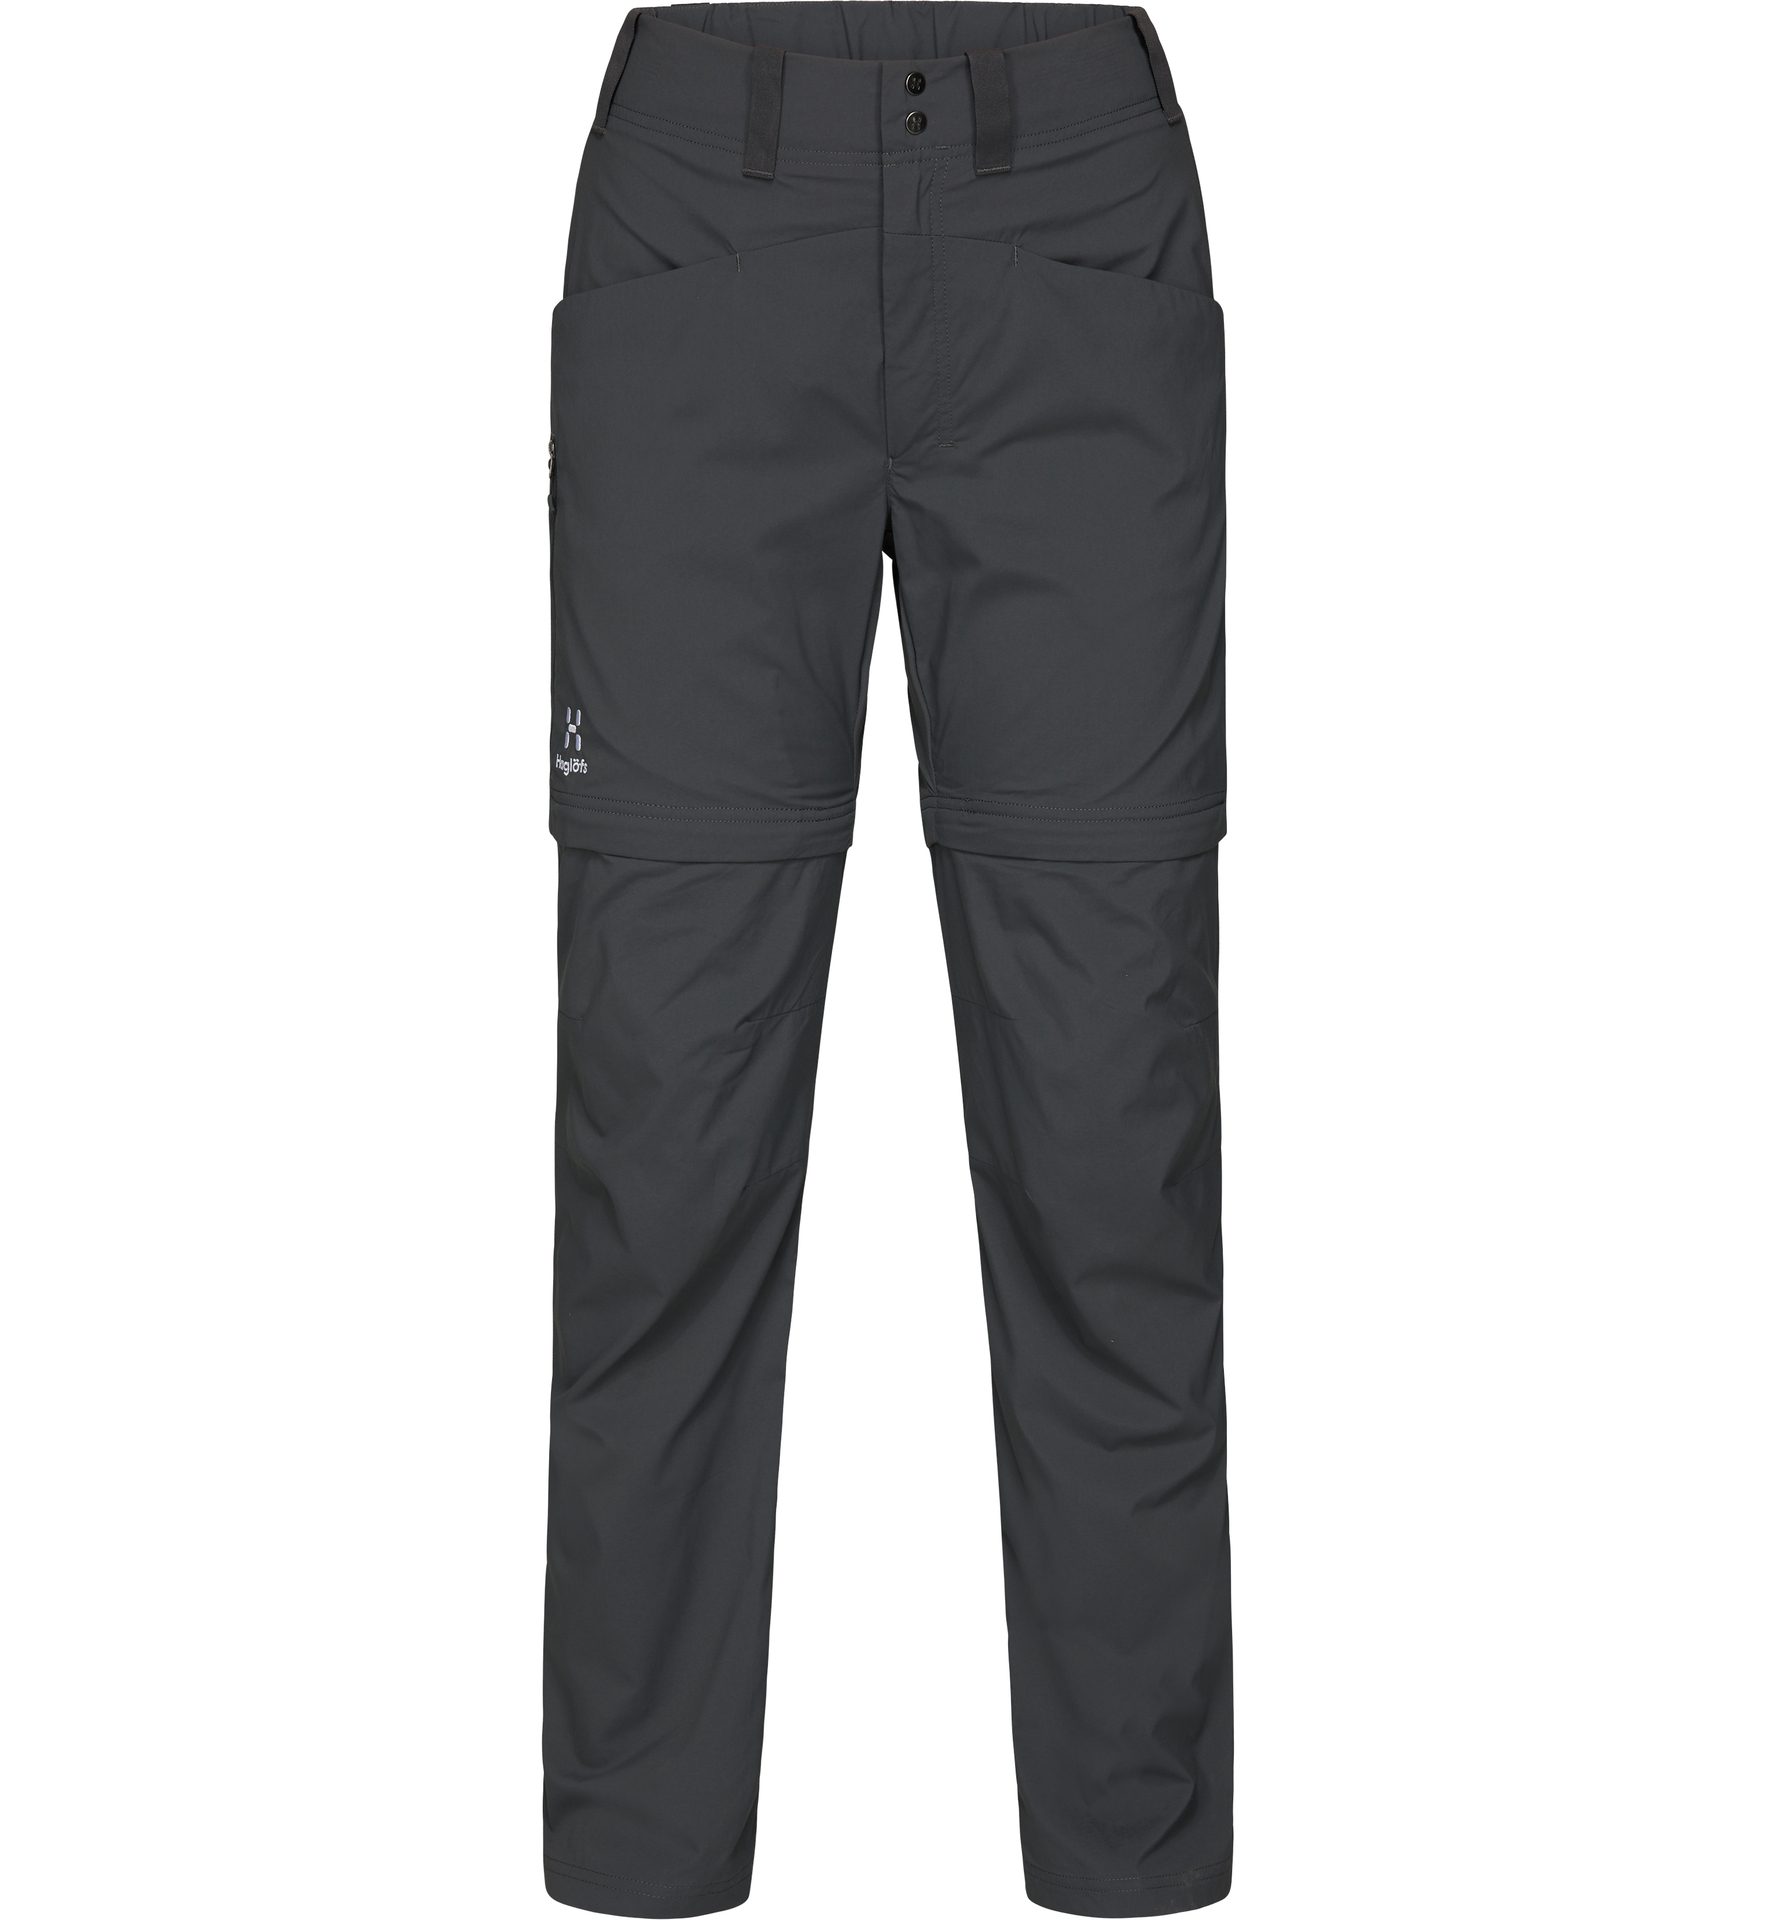 Womens convertible mountain hiking trousers  MH550